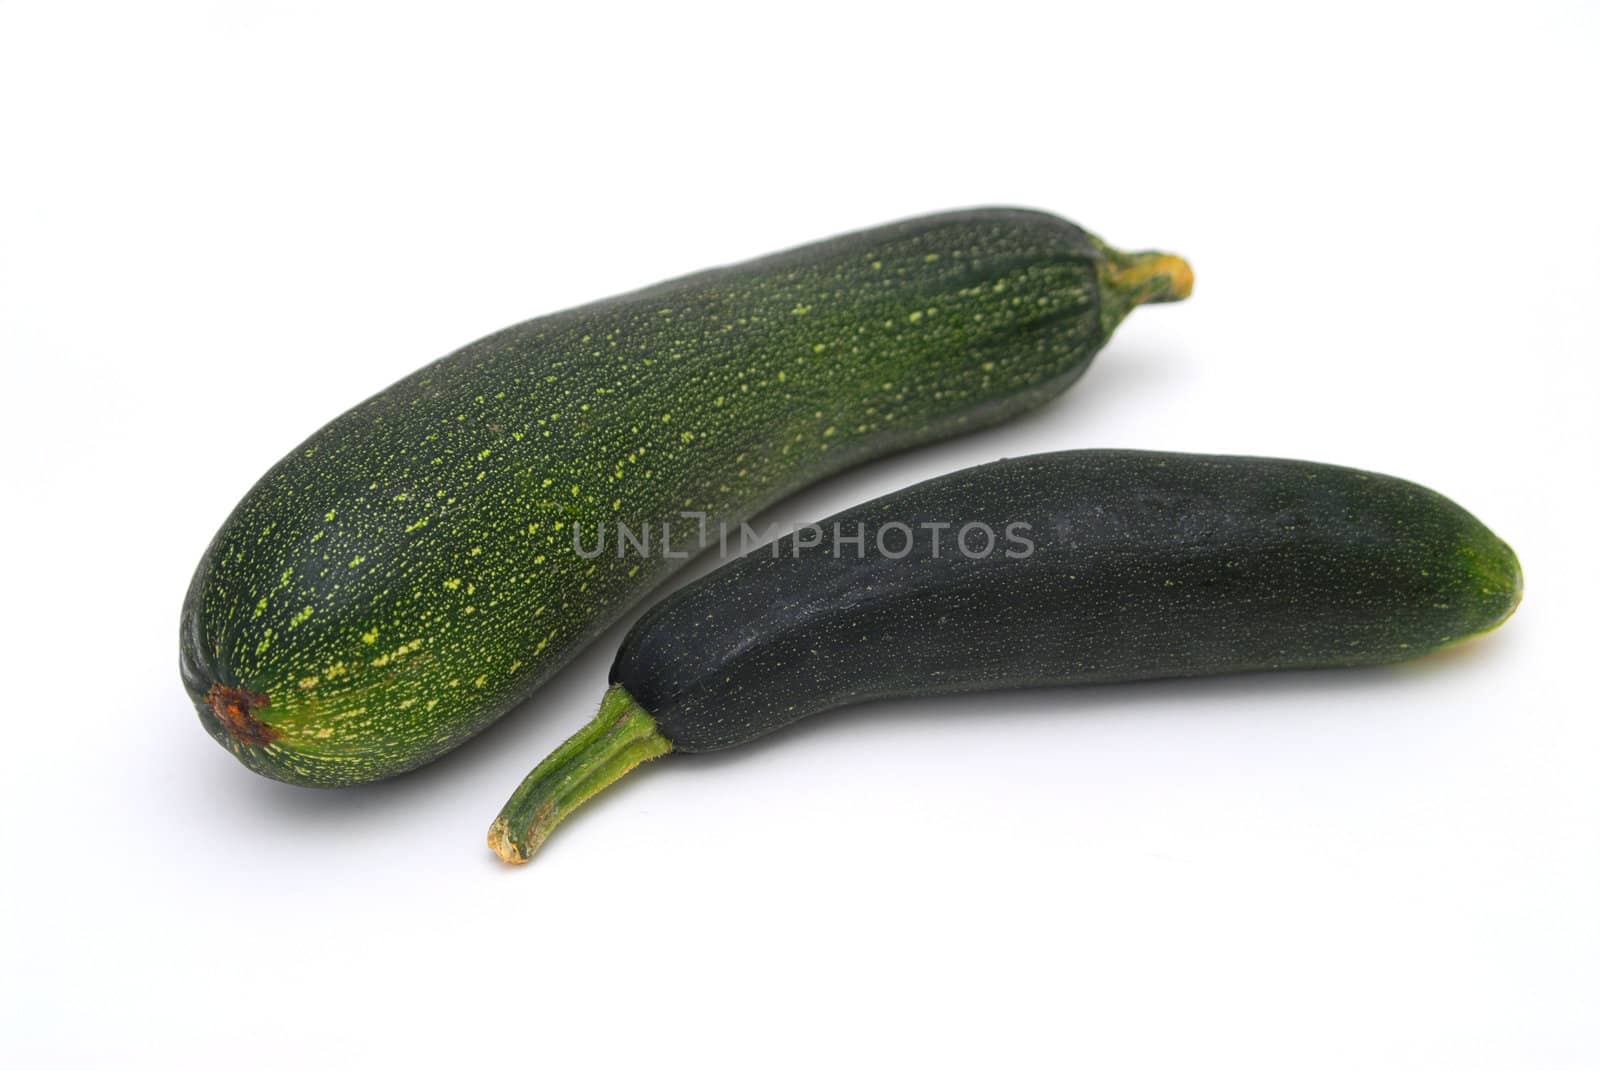 Two courgettes by Yaurinko